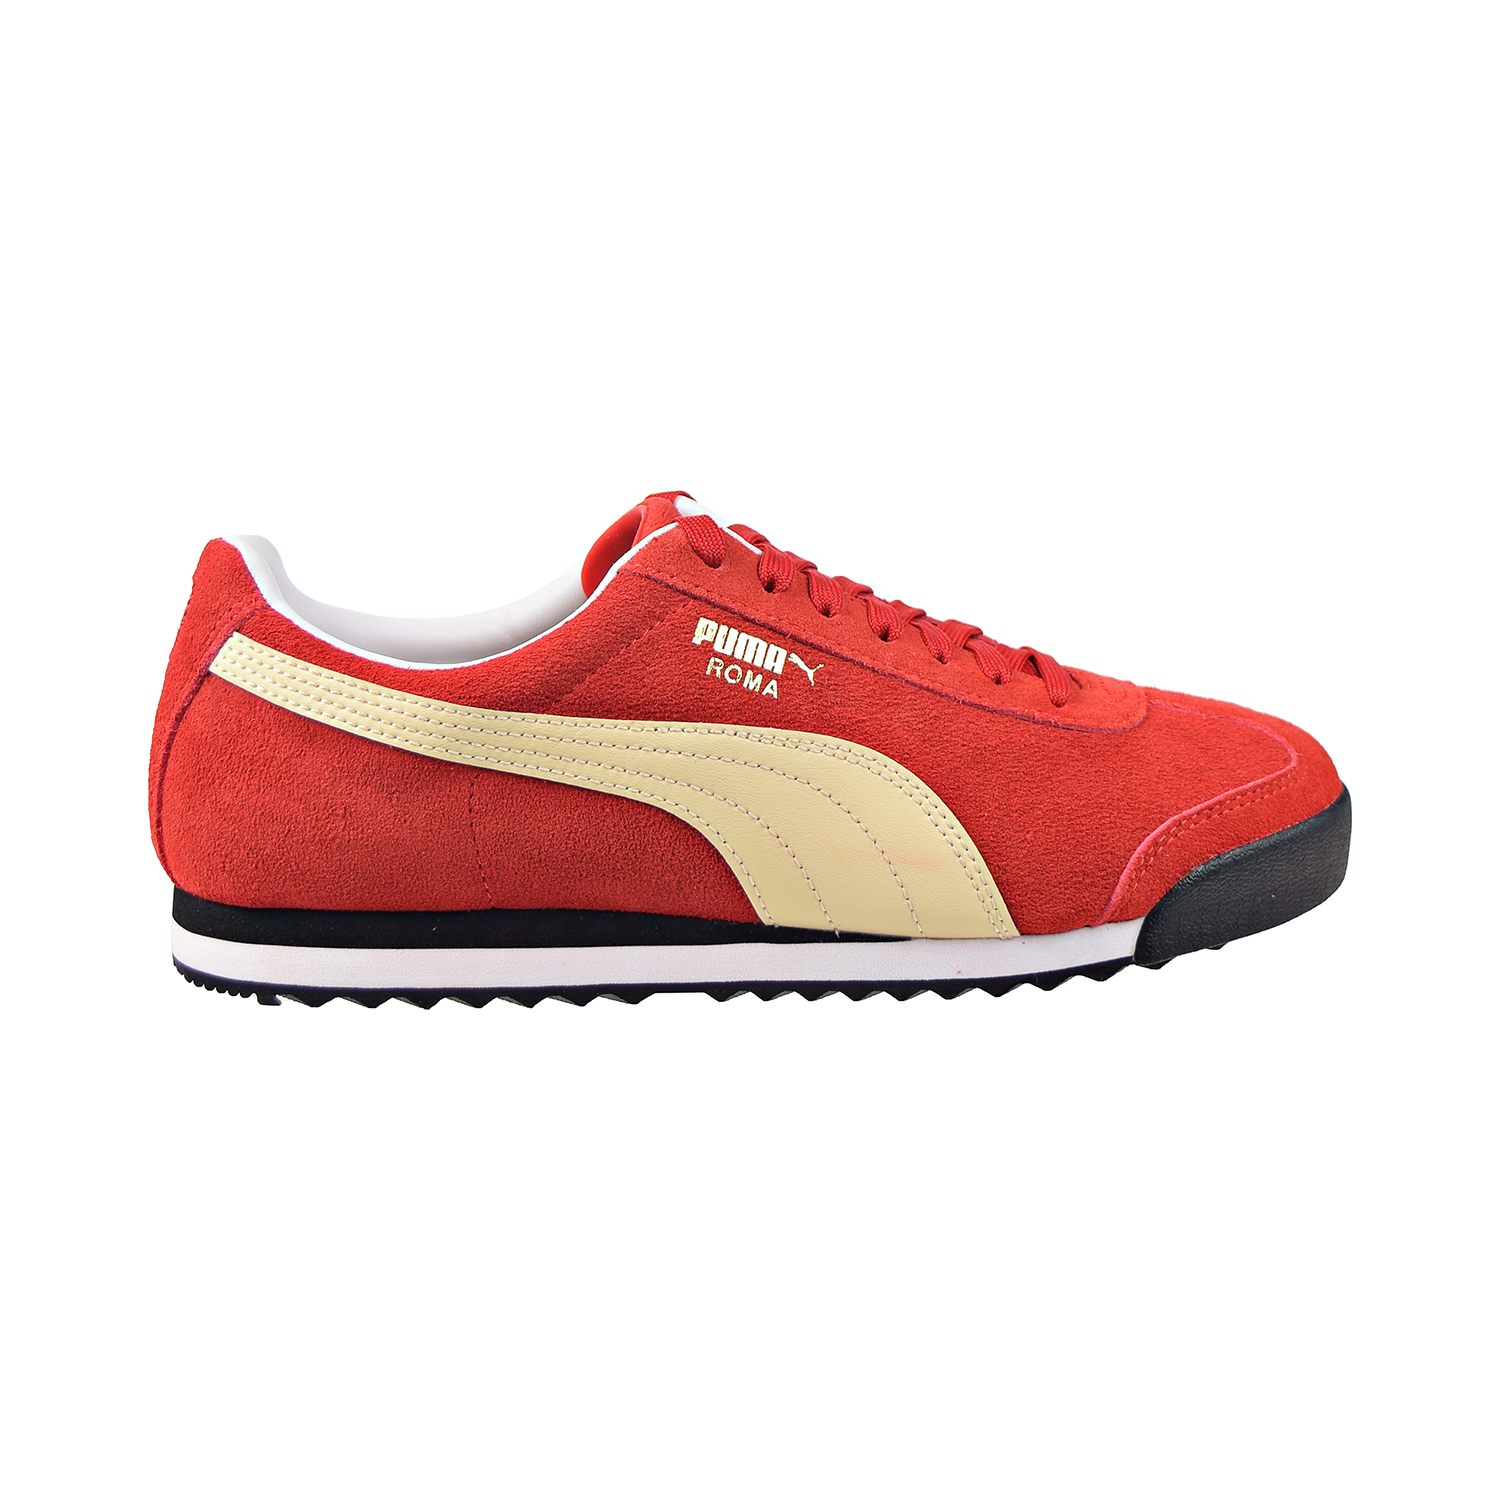 Puma Roma Suede Men's Shoes High Risk Red/Summer Melon 365437-13 - image 1 of 6